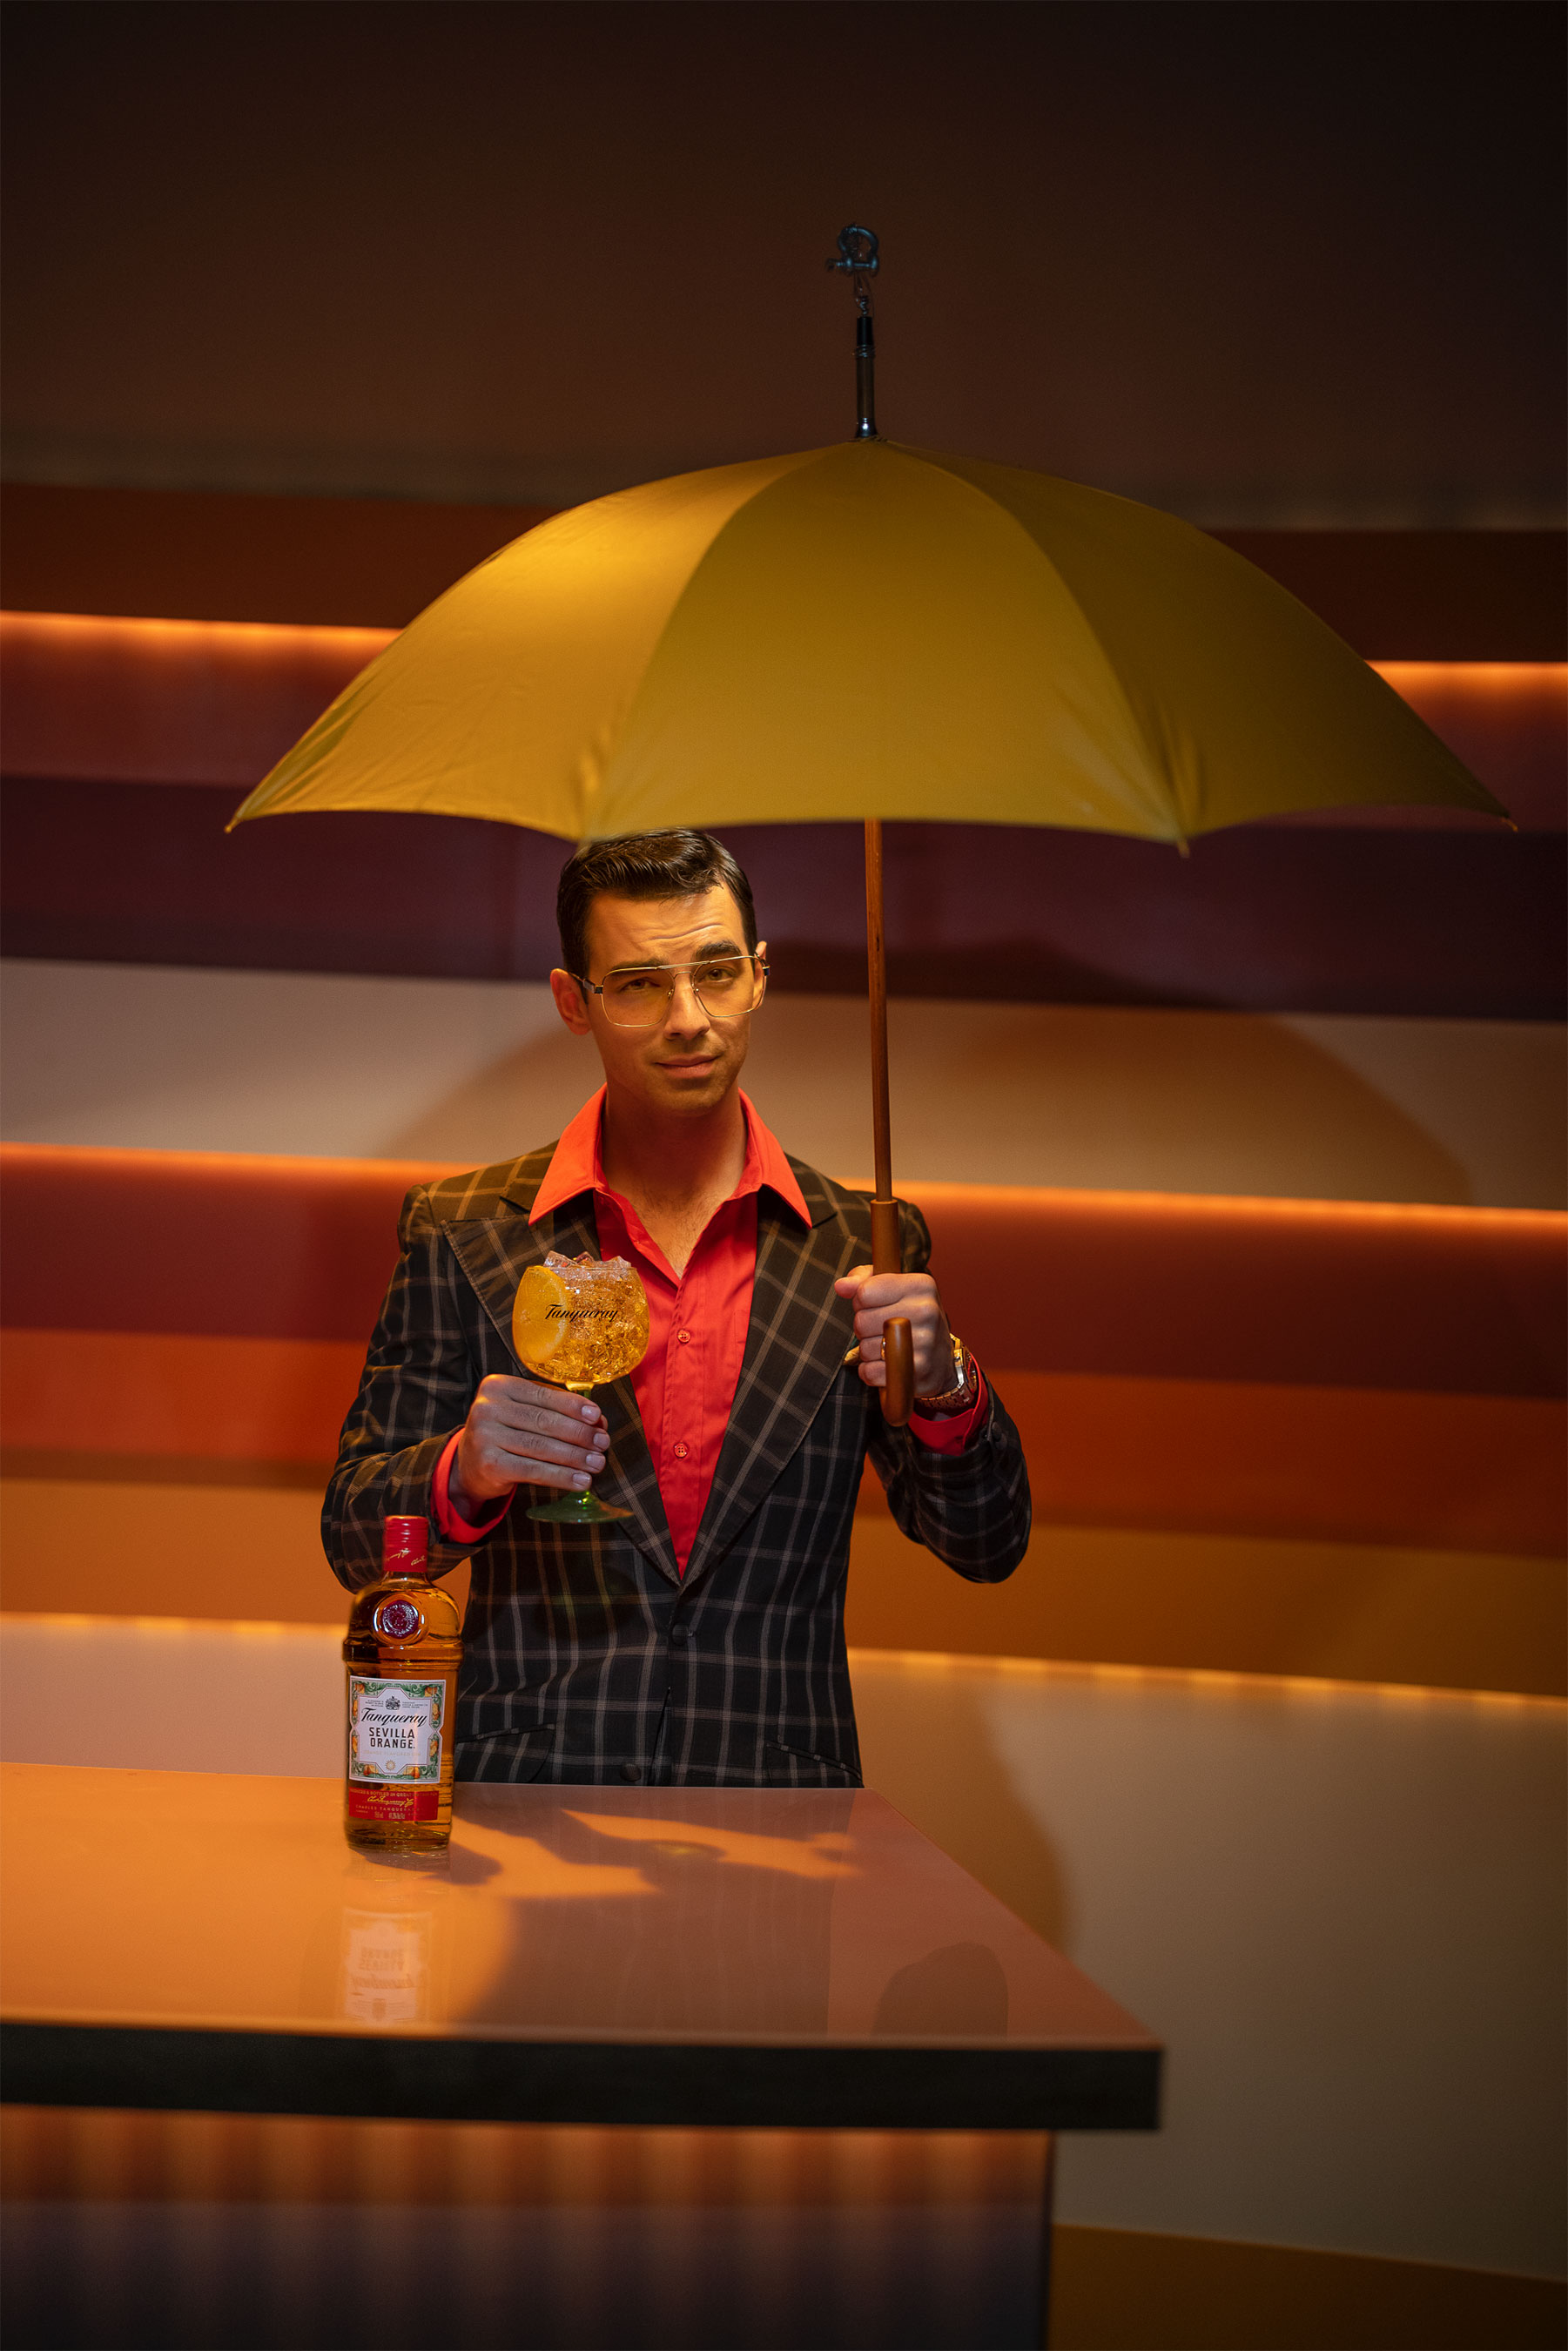 Tanqueray teamed up with Joe Jonas to launch ‘Today’s Forecast: Sunshine in a Glass,’ a new content series introducing Tanqueray Sevilla Orange nationally. / Photo Credit: Atiba Jefferson